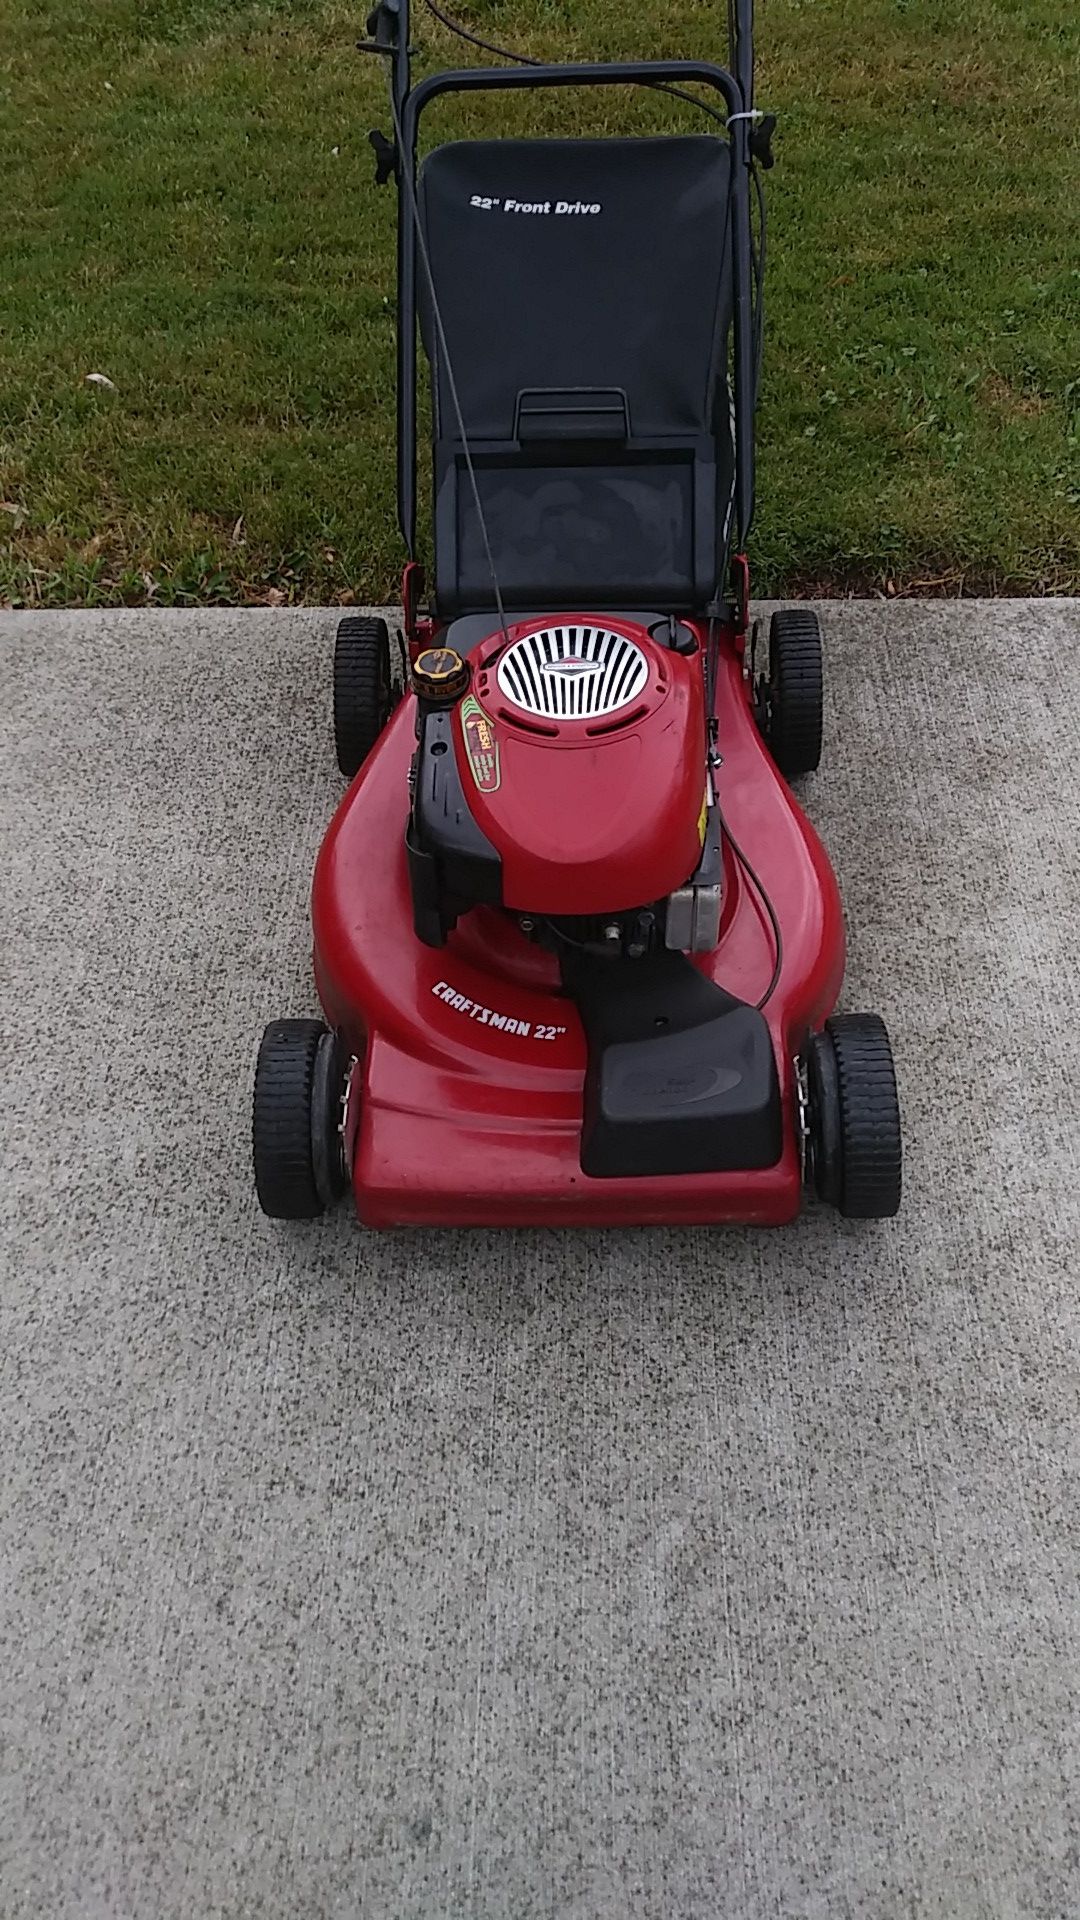 Craftsman 190cc self propelled lawn mower with a bag